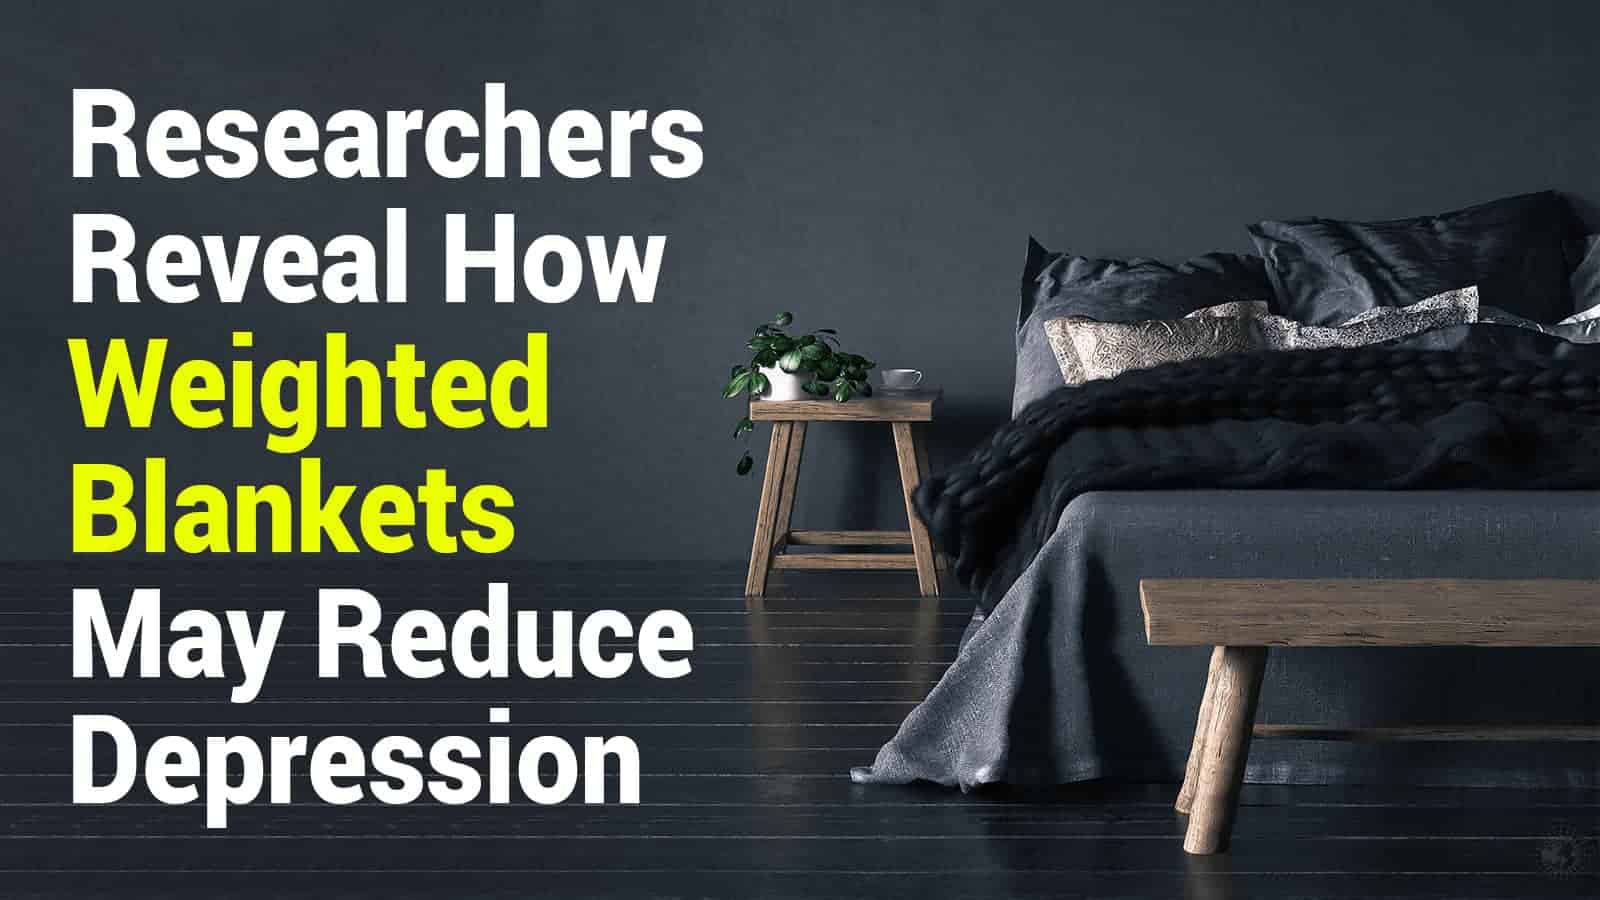 Researchers Reveal How Weighted Blankets May Reduce Depression